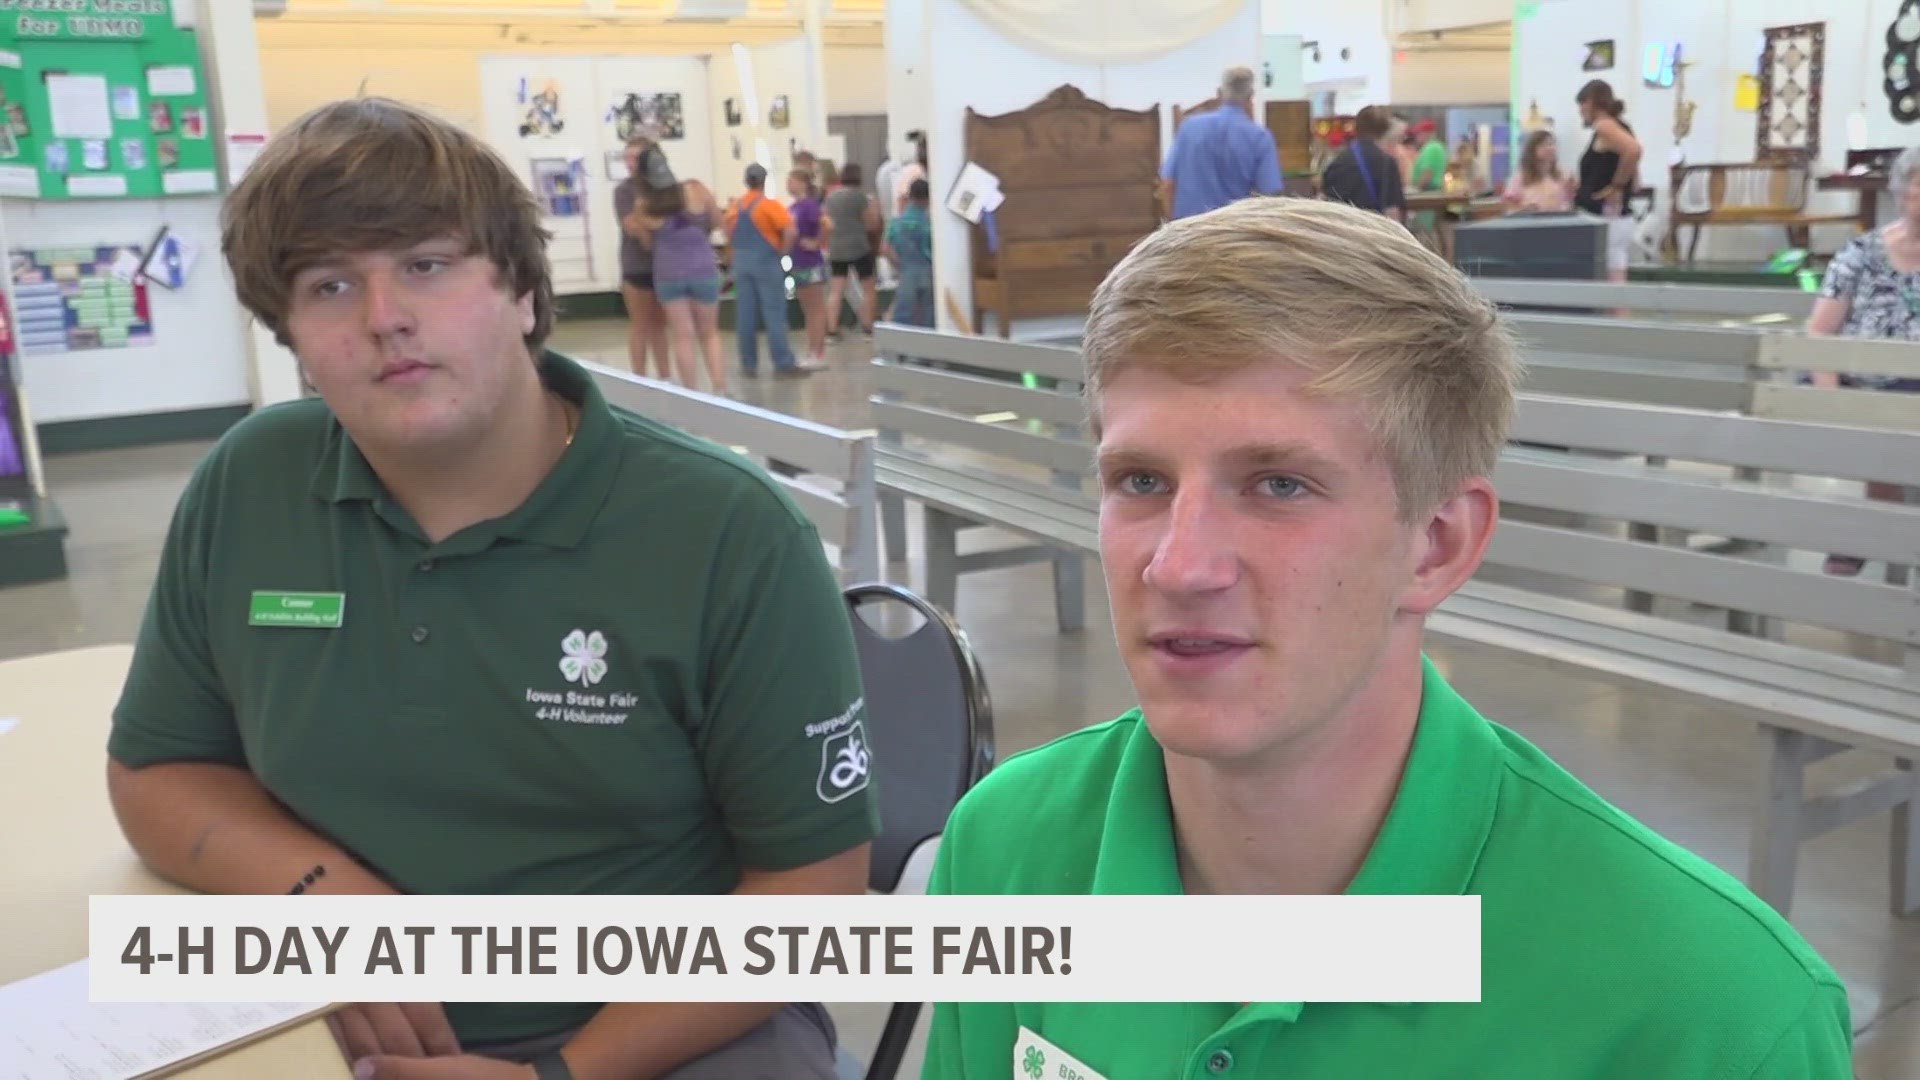 Friday's theme is "Iowa 4-H Day," where youth from across the state showcase their livestock, horticulture and art projects.